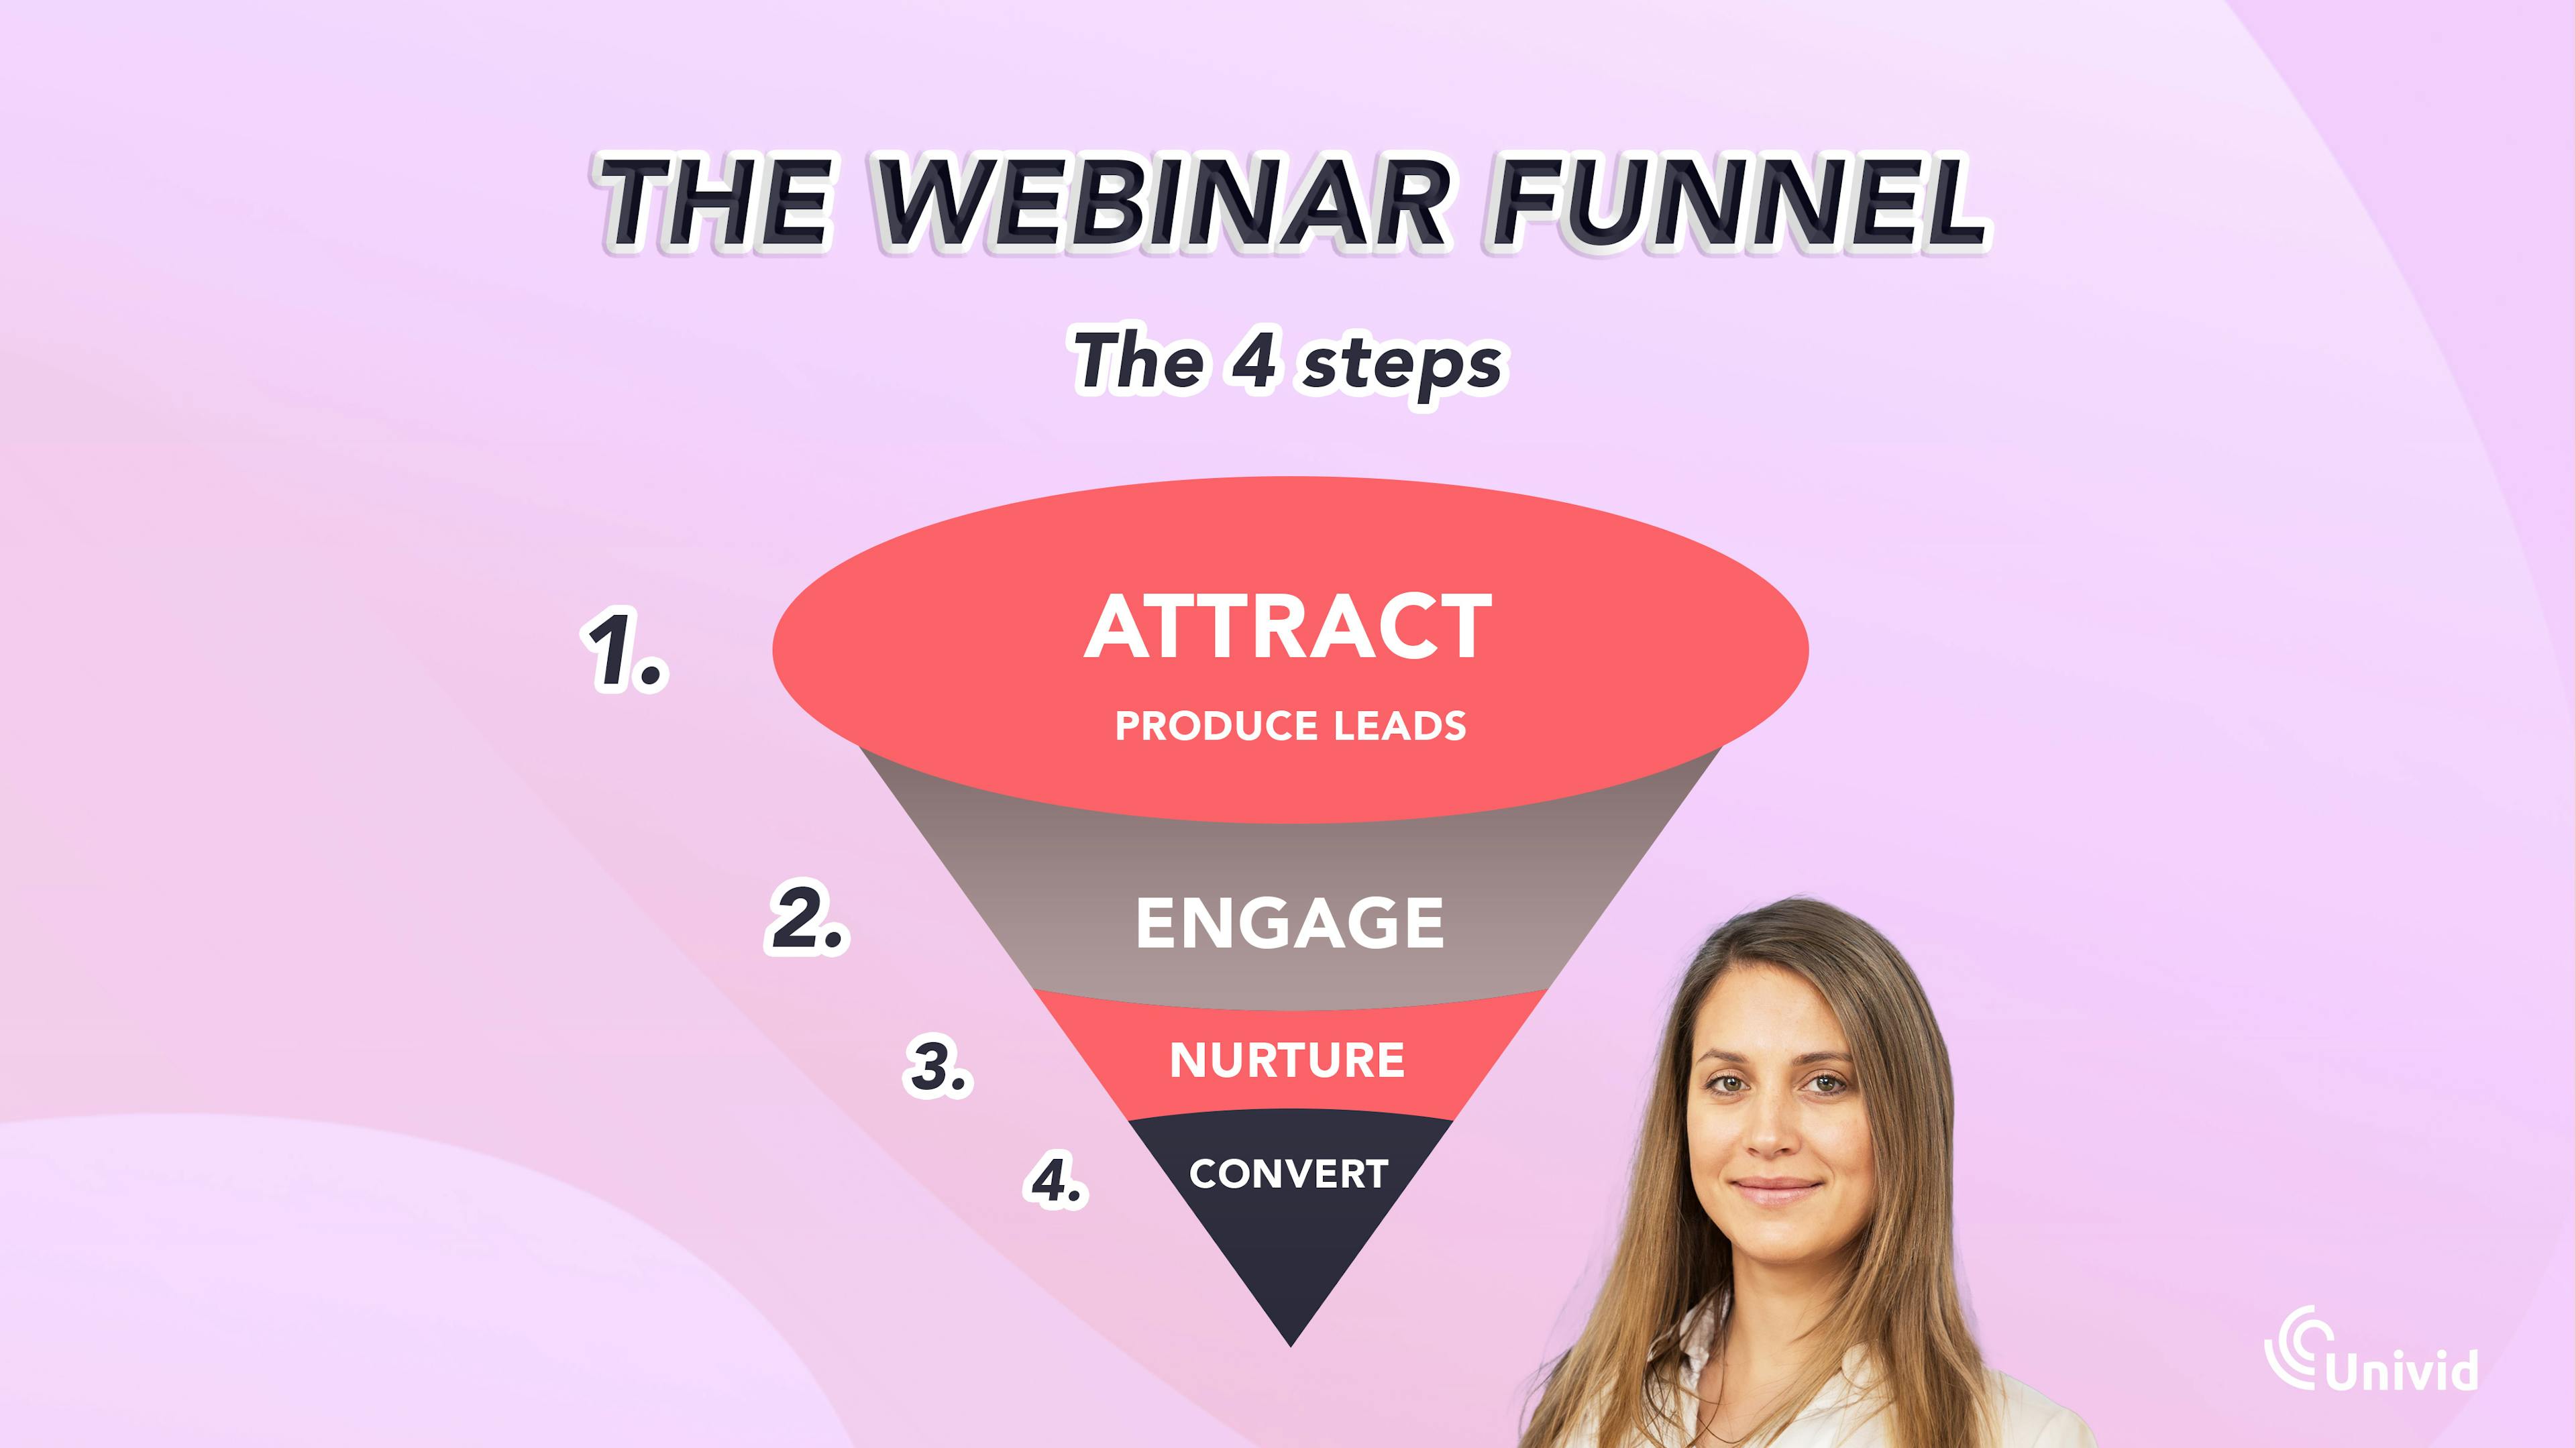 The four steps in a webinar funnel - attract, engage, nurture, and convert.